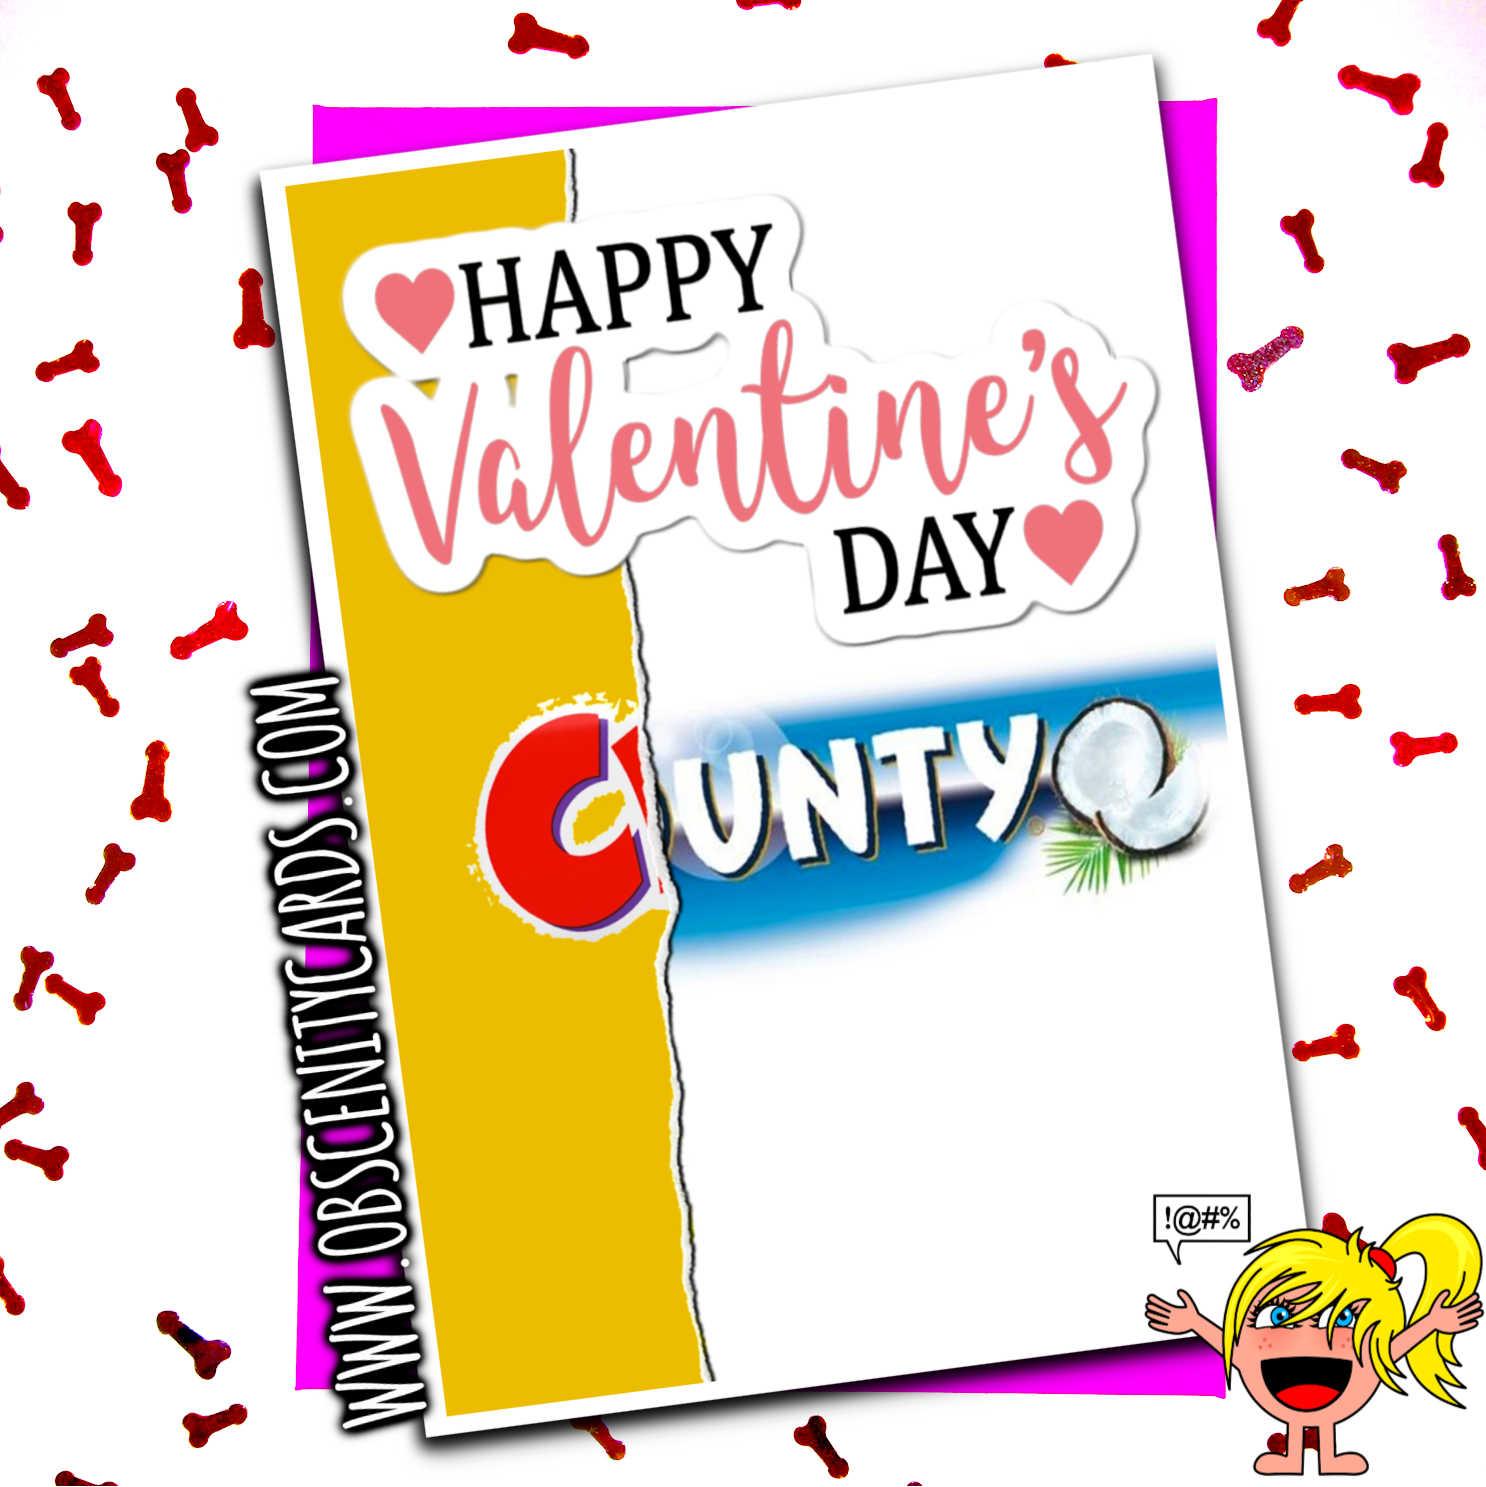 HAPPY VALENTINE'S DAY CUNTY CHOCOLATE WRAPPER FUNNY VALENTINES CARD